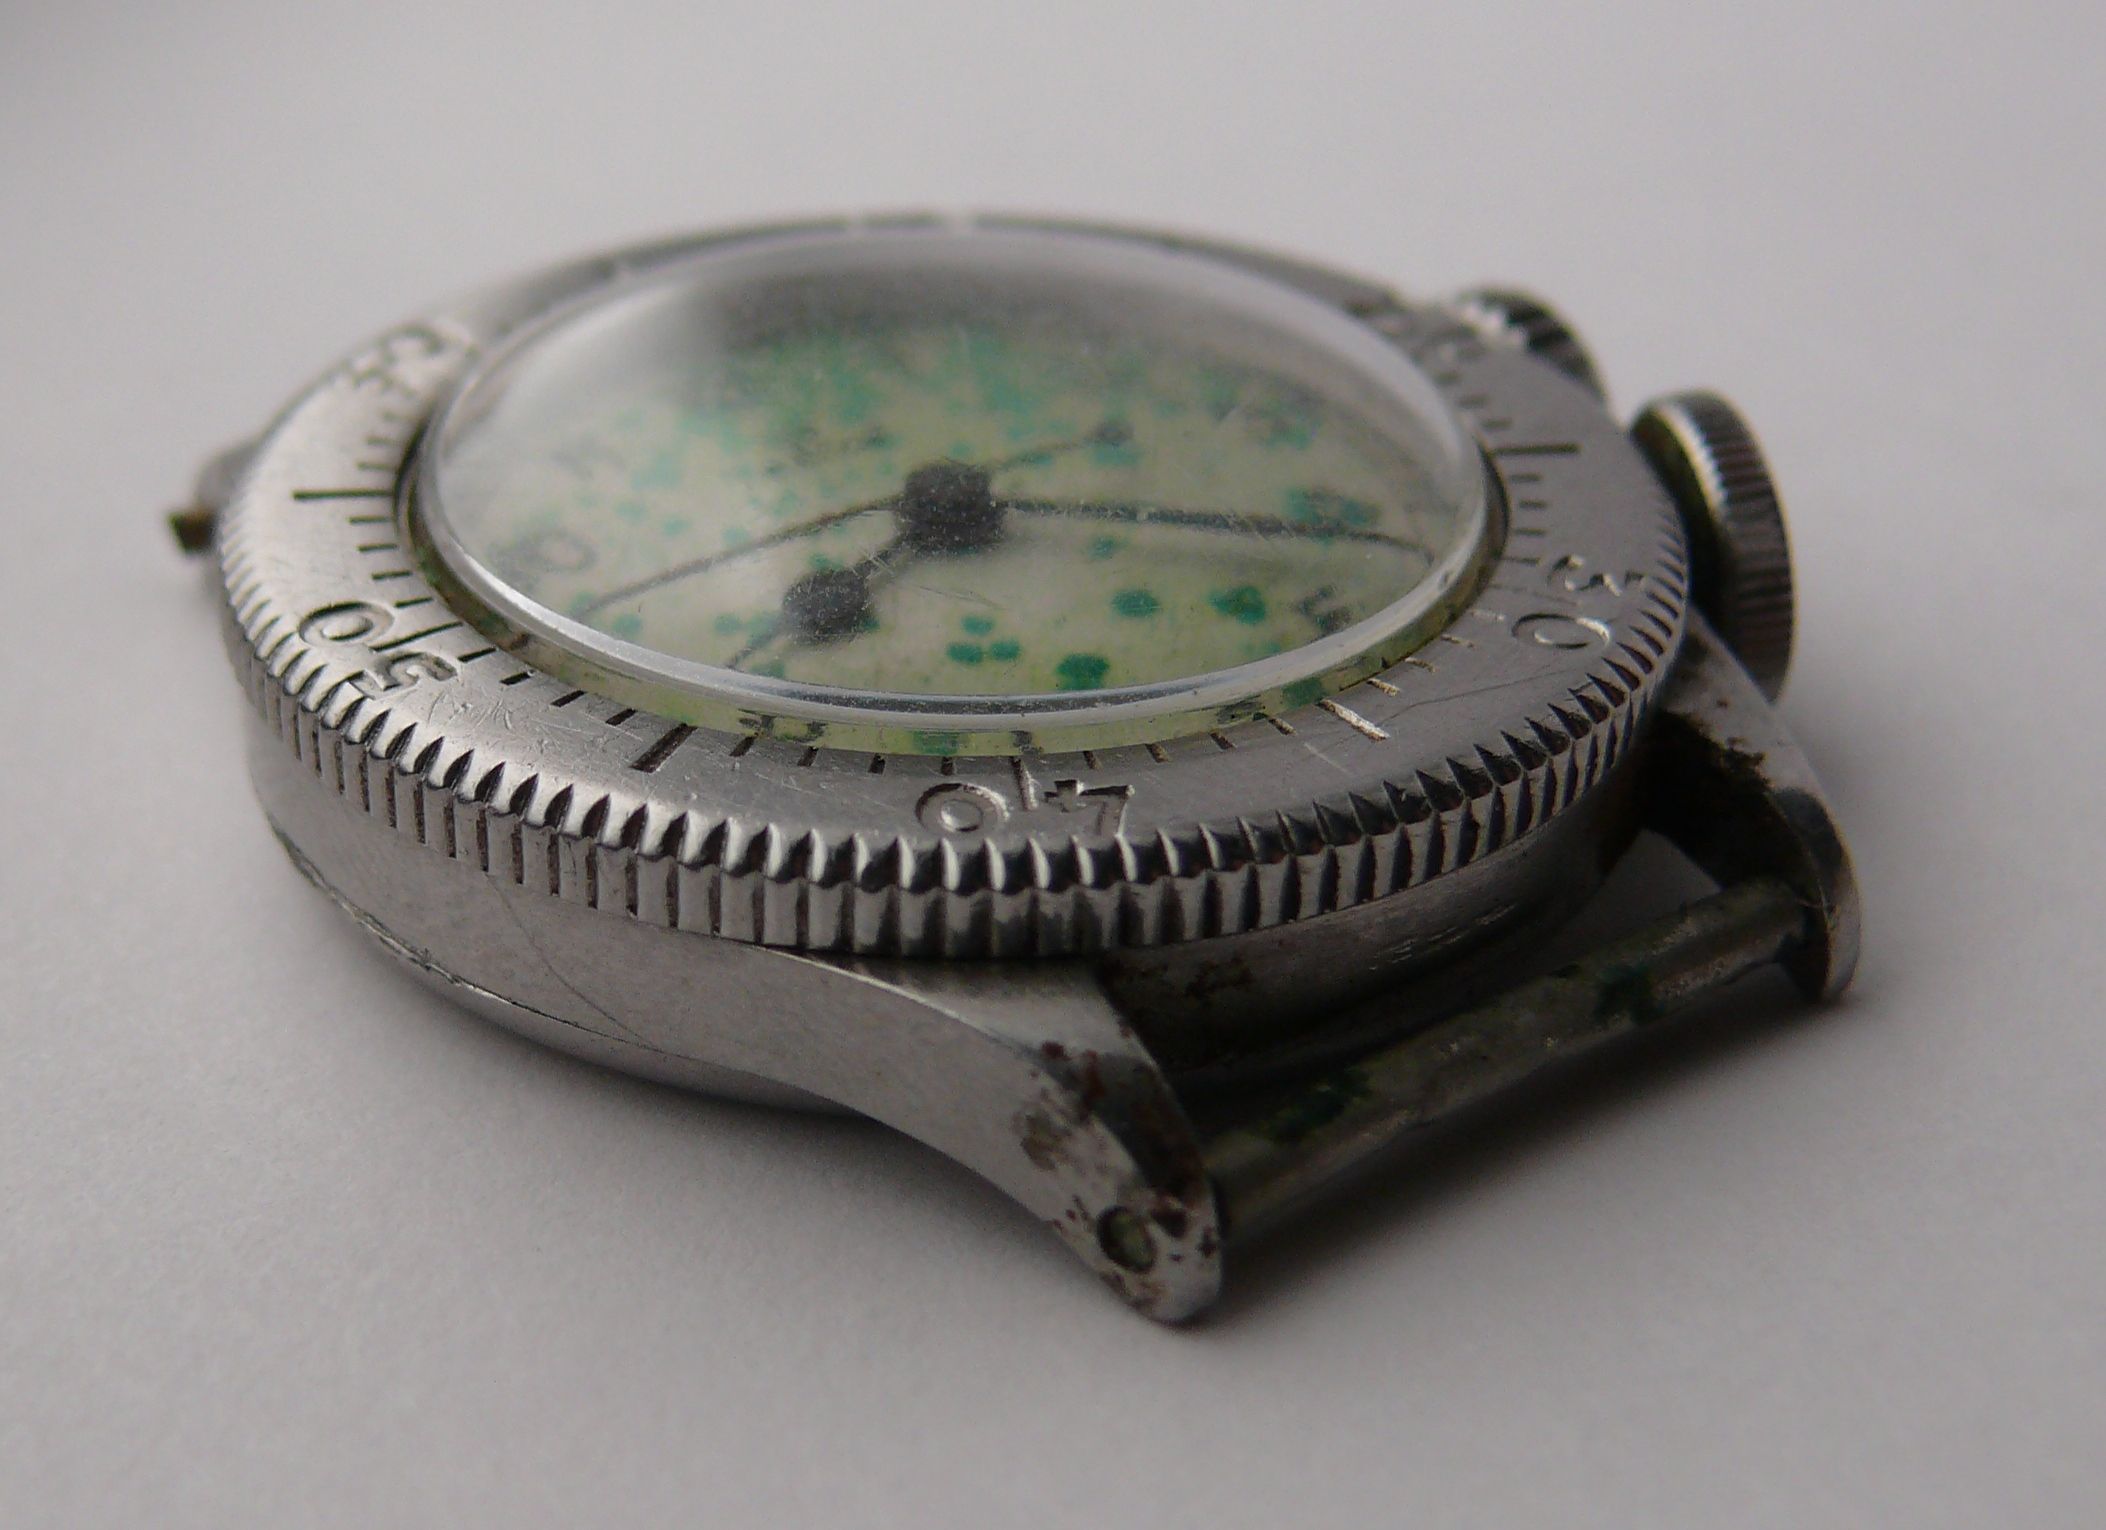 1940 WW2 Vintage Gents Omega RAF Weems Wristwatch Ref 6B 159. A very rare and collectable model, - Image 12 of 15